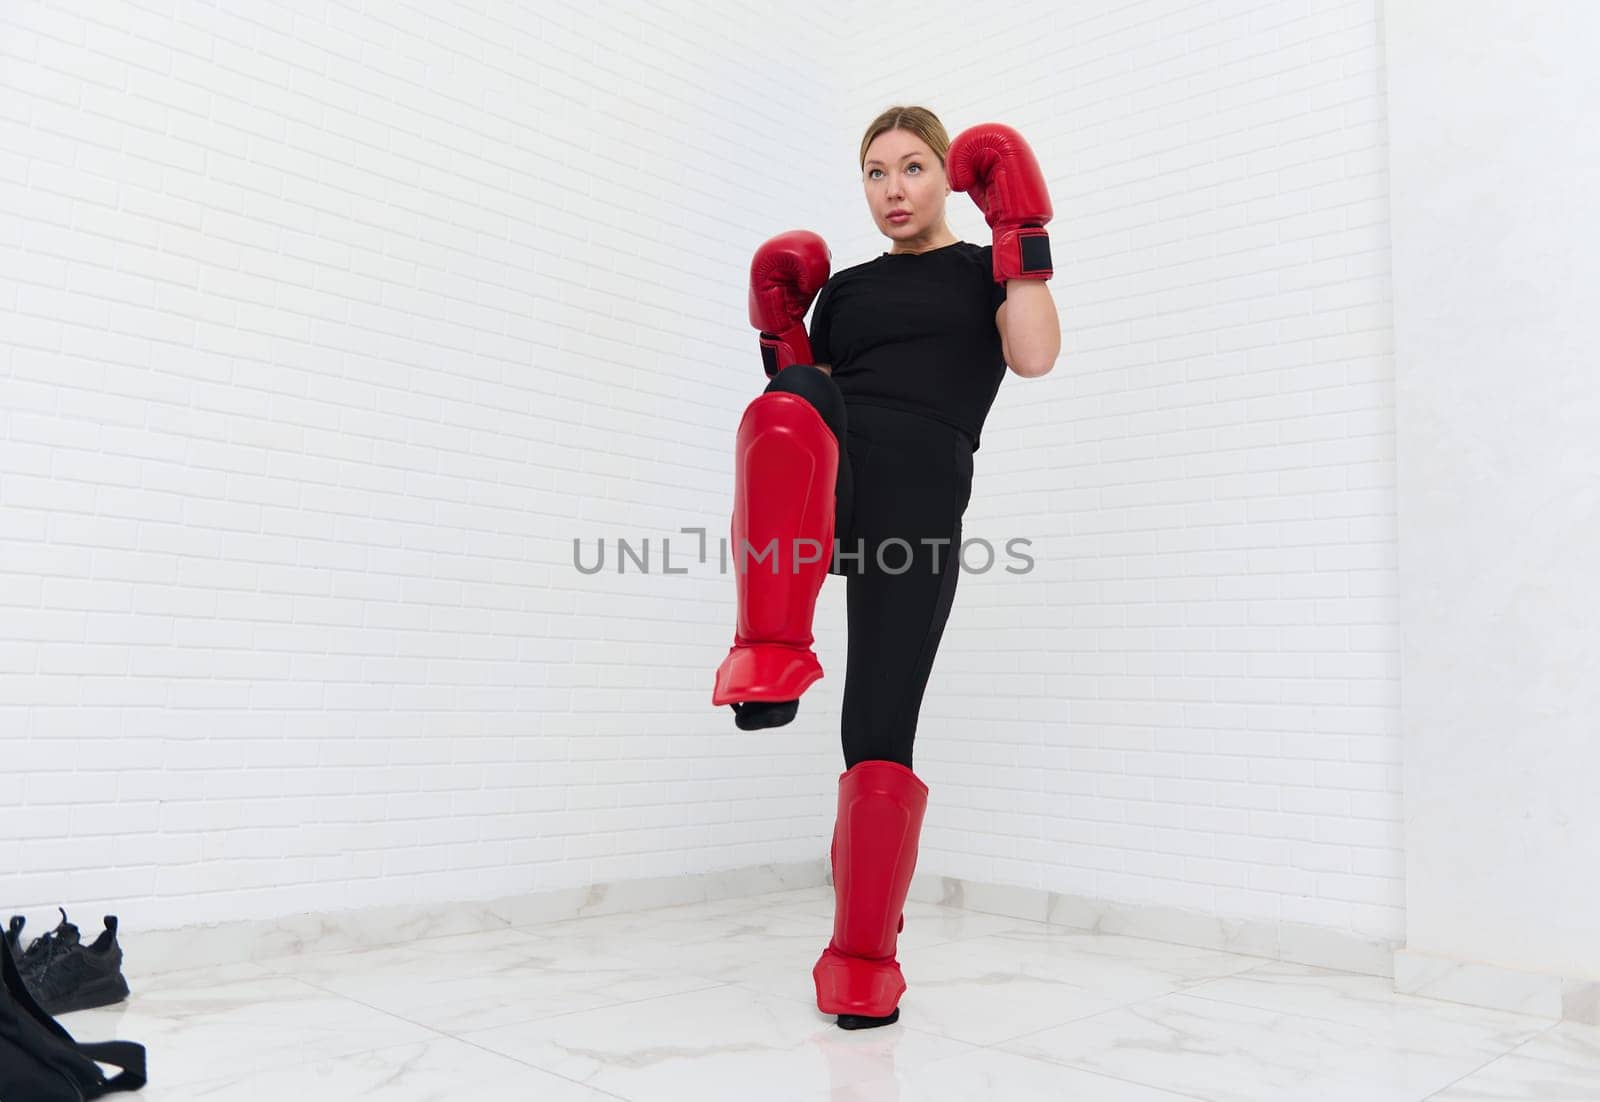 European blonde young kickboxing woman in black activewear and red kickboxing gloves, isolated on white background performing a martial arts kick. Sport exercise, fitness and cardio workout concept